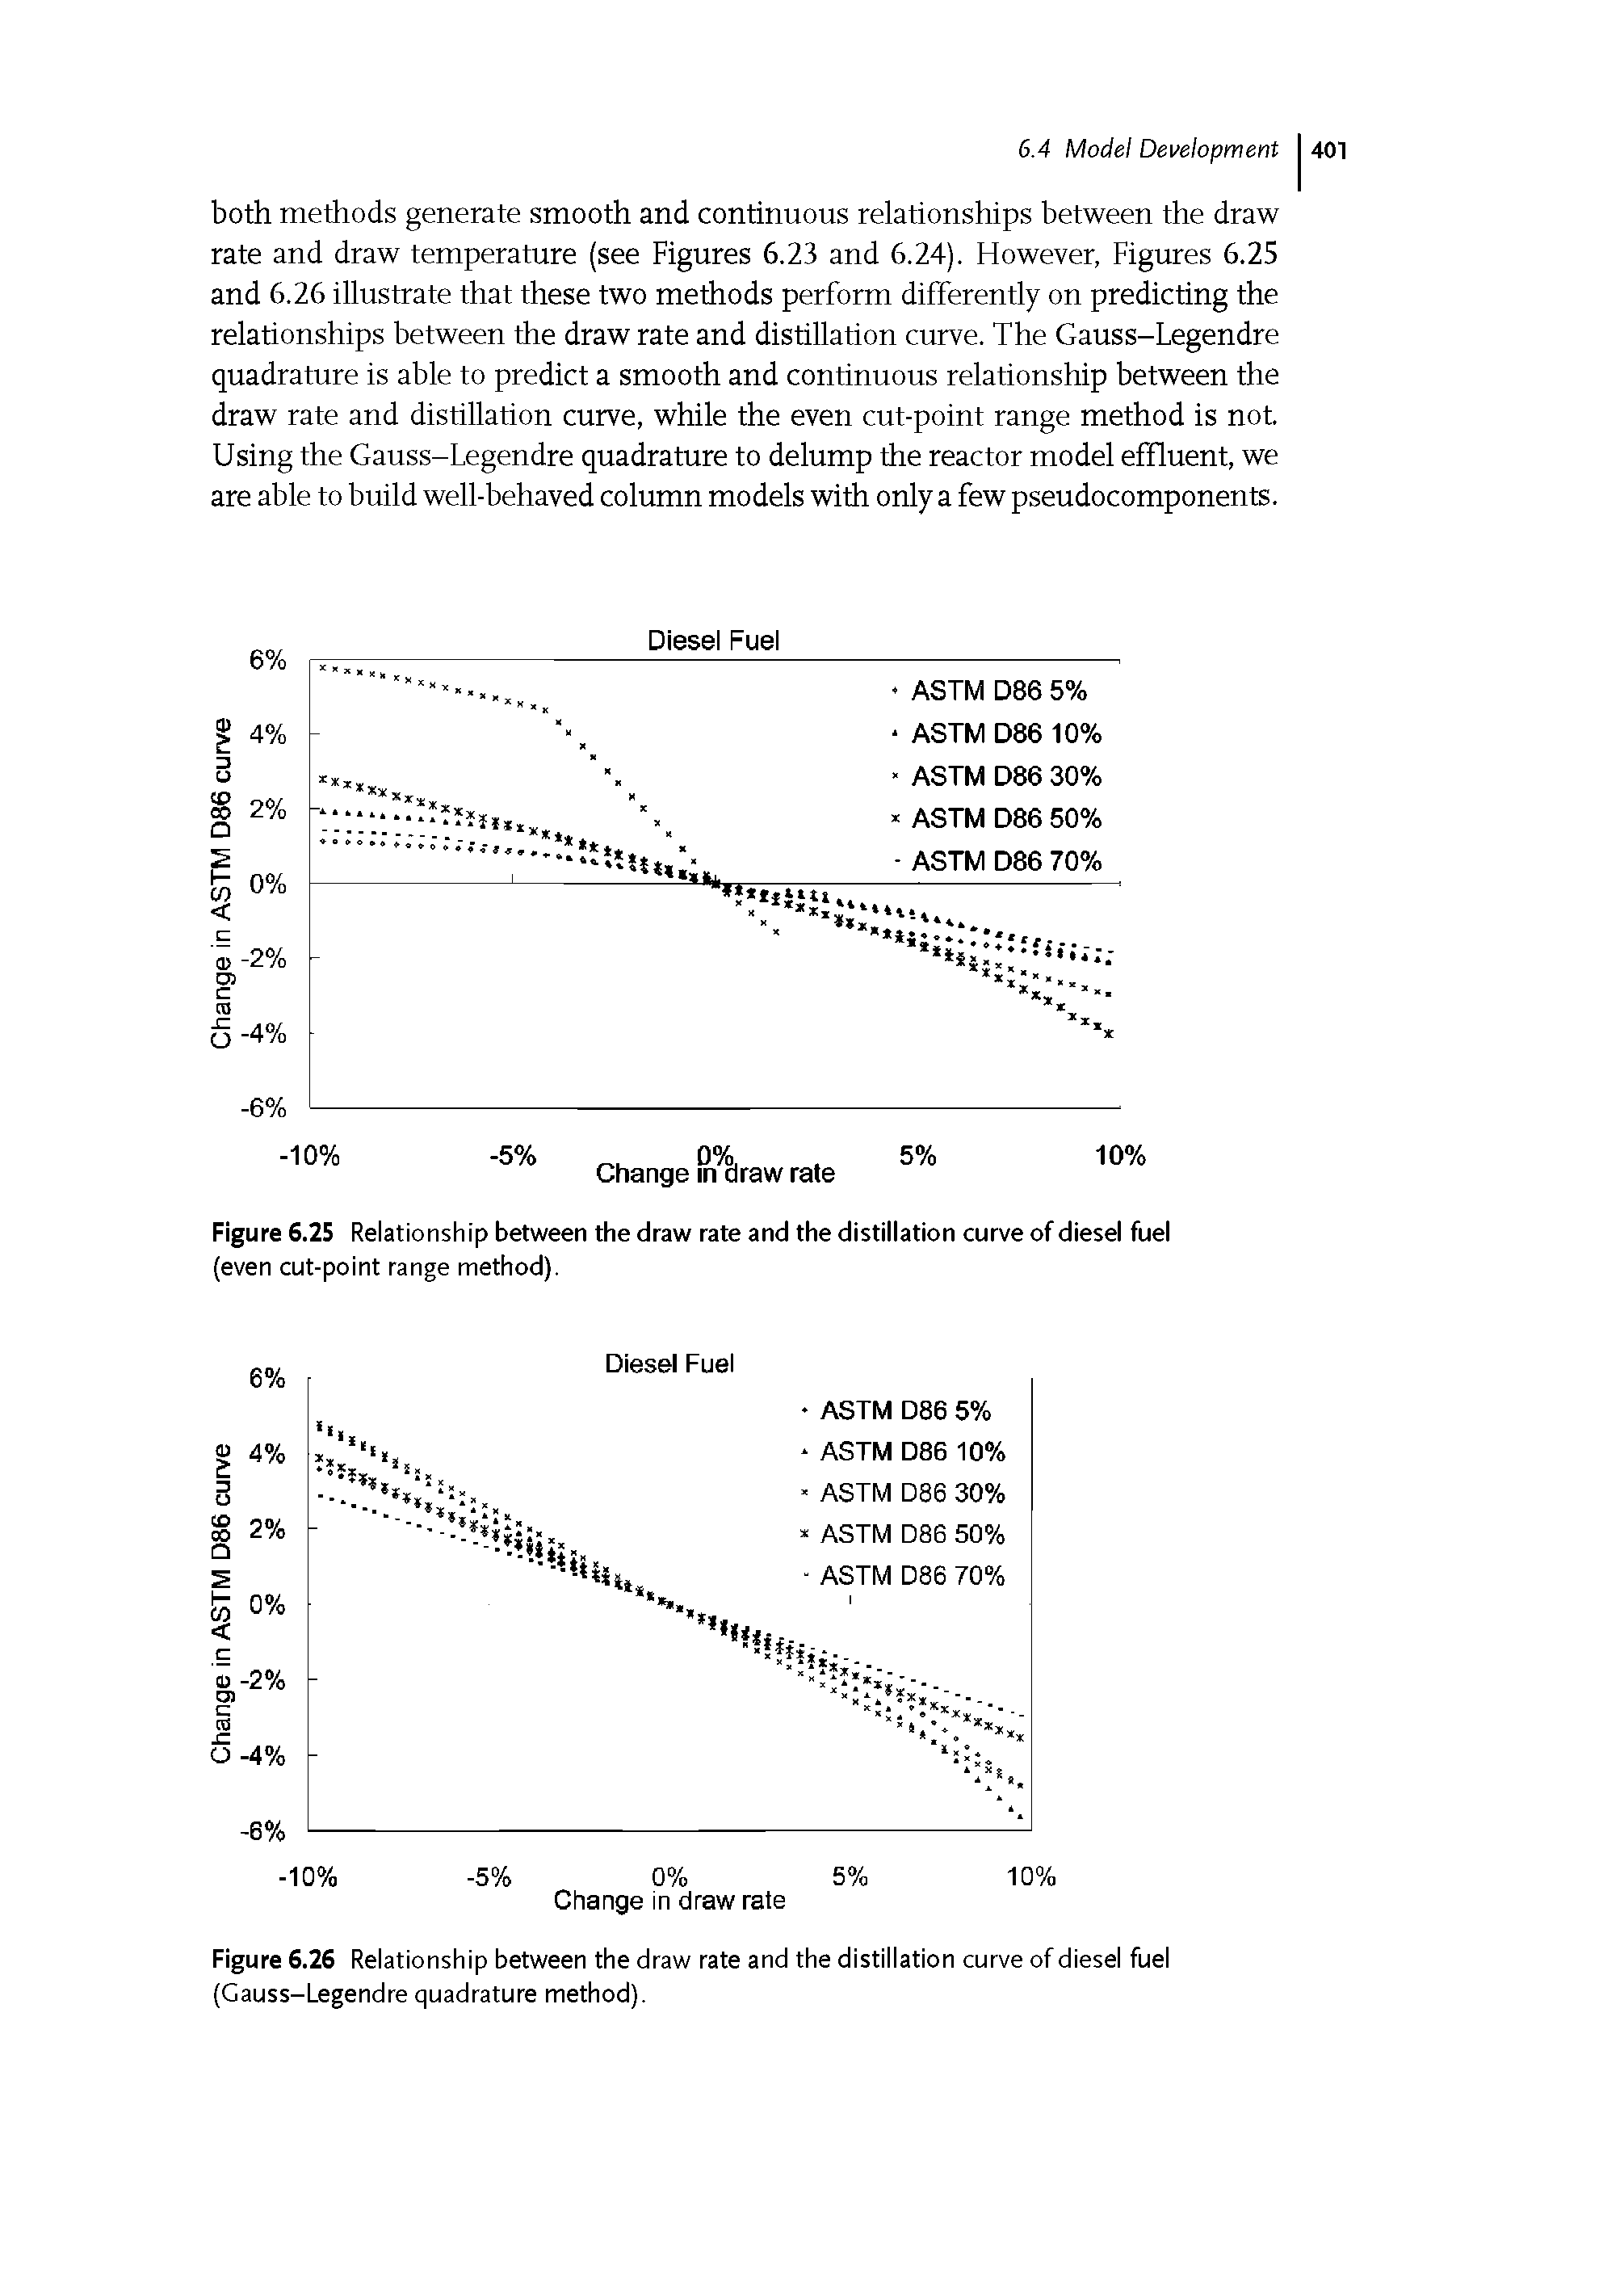 Figure 6.25 Relationship between the draw rate and the distillation curve of diesel fuel (even cut-point range method).